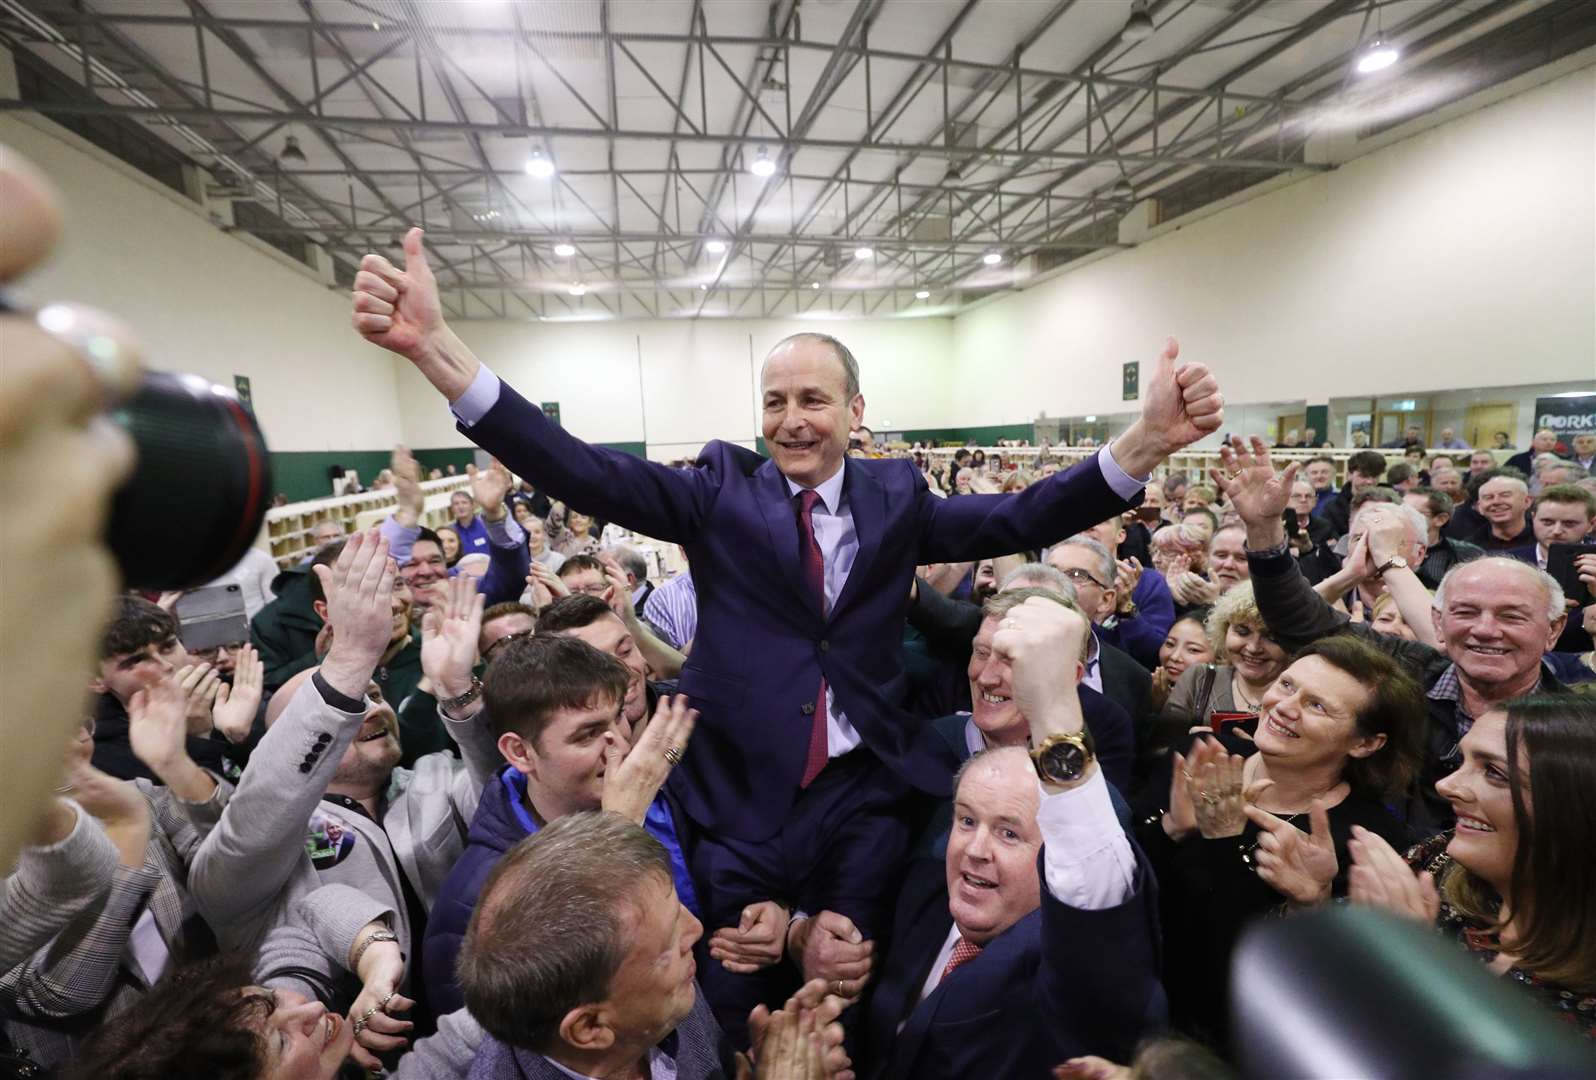 Fianna Fail leader Micheal Martin celebrates after being elected for the Cork South-Central constituency during the general election in February (Yui Mok/PA)